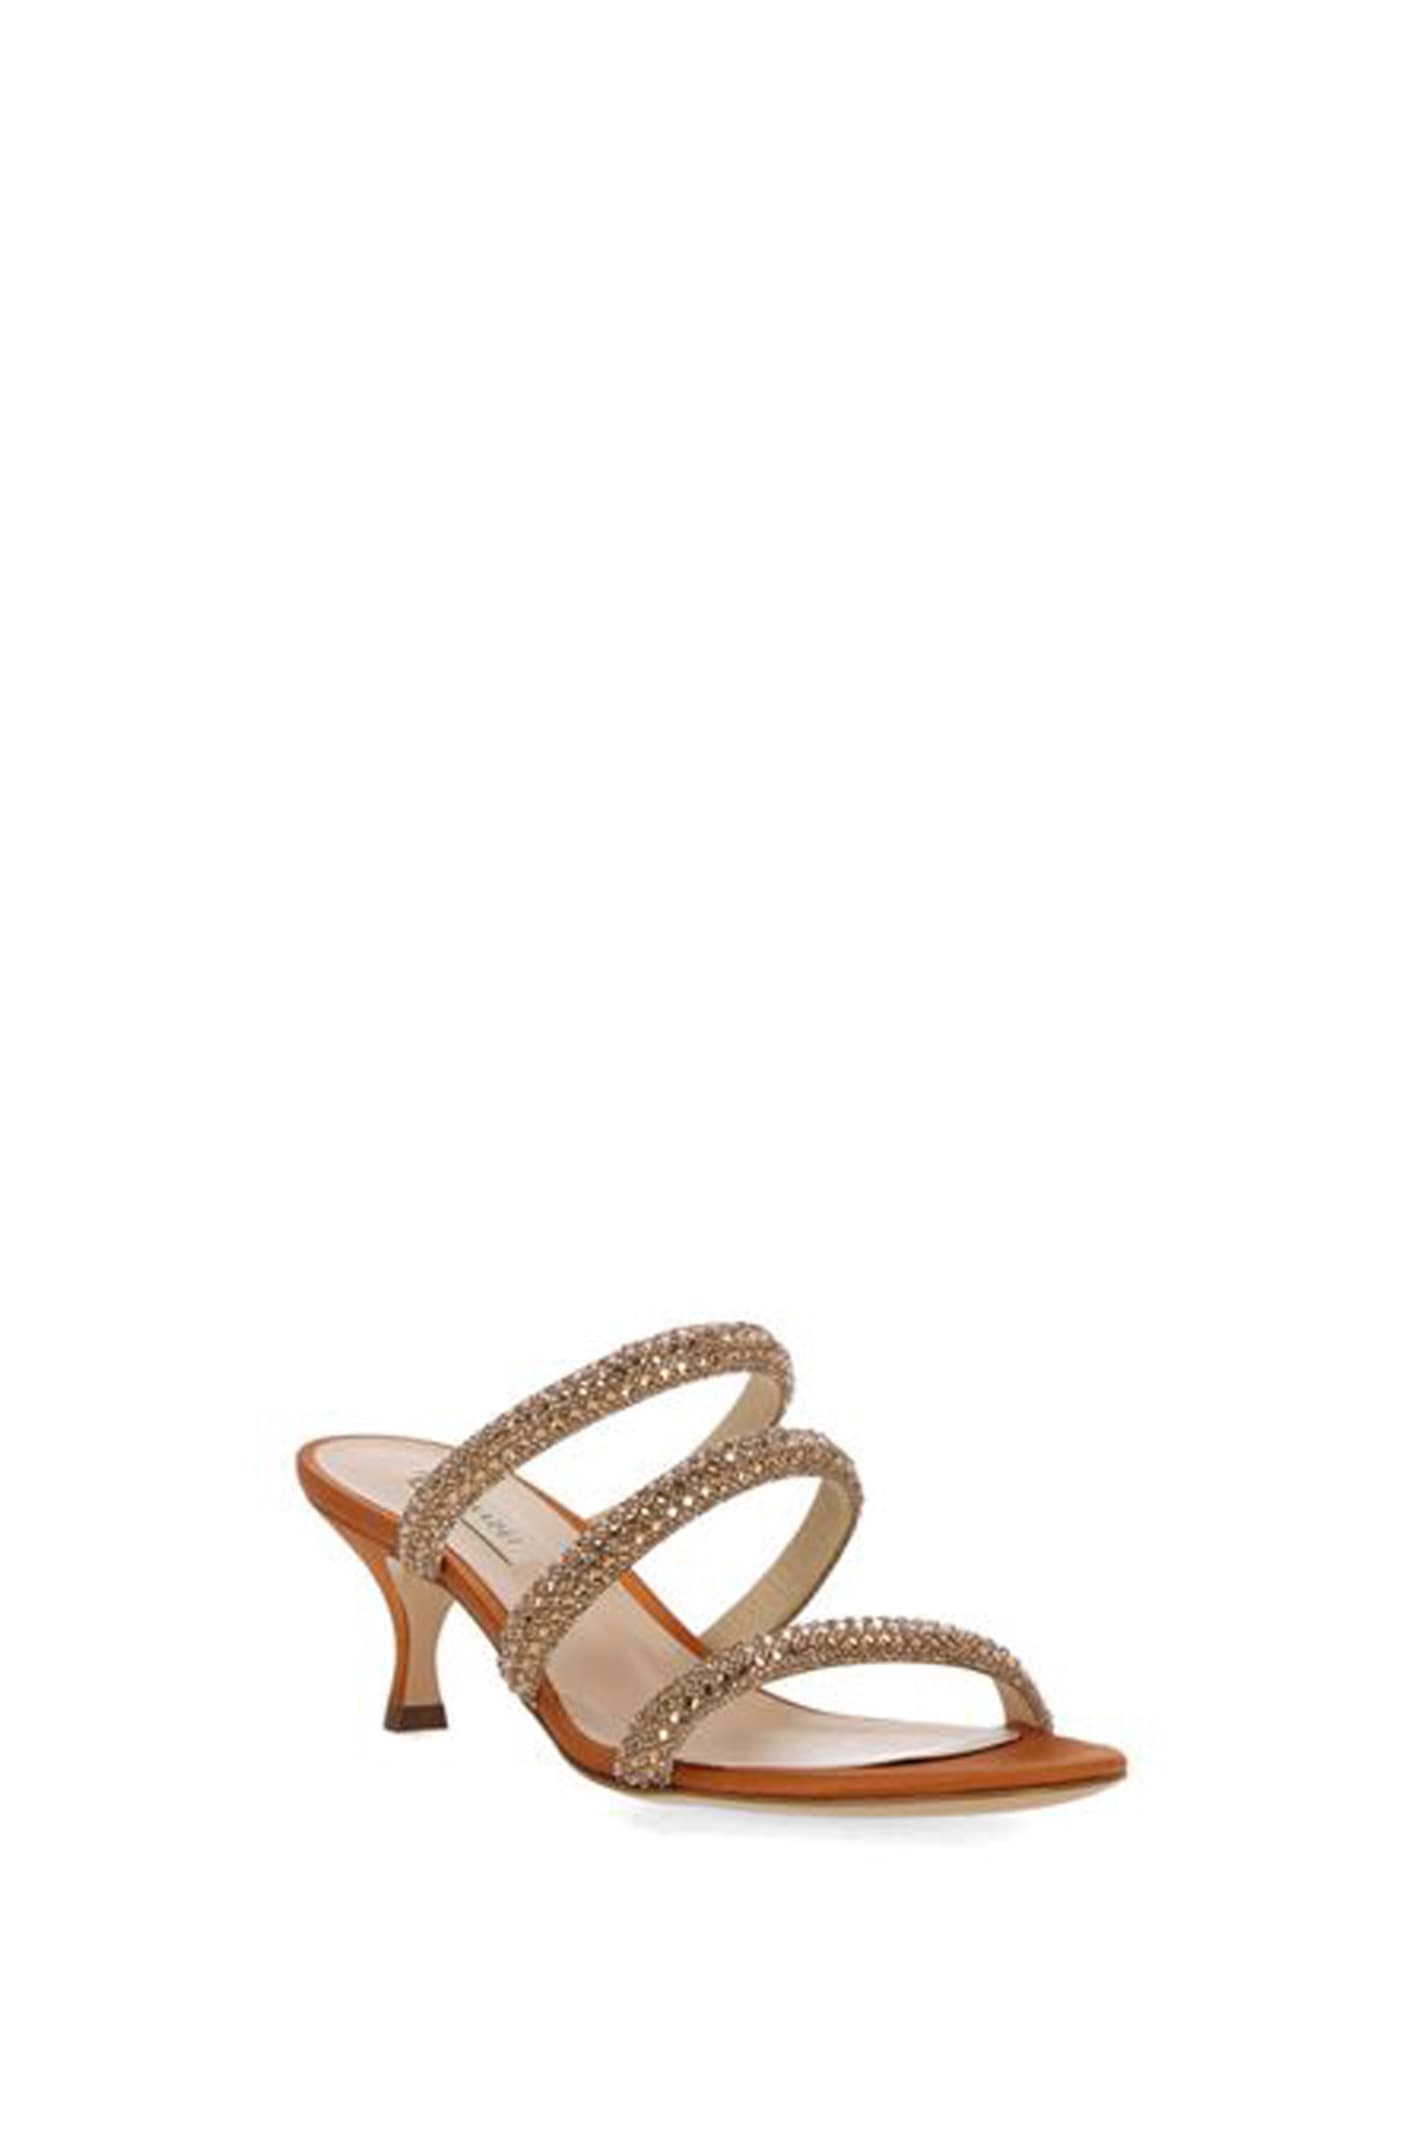 Shop Casadei Shoes With Heels In Honey Natur